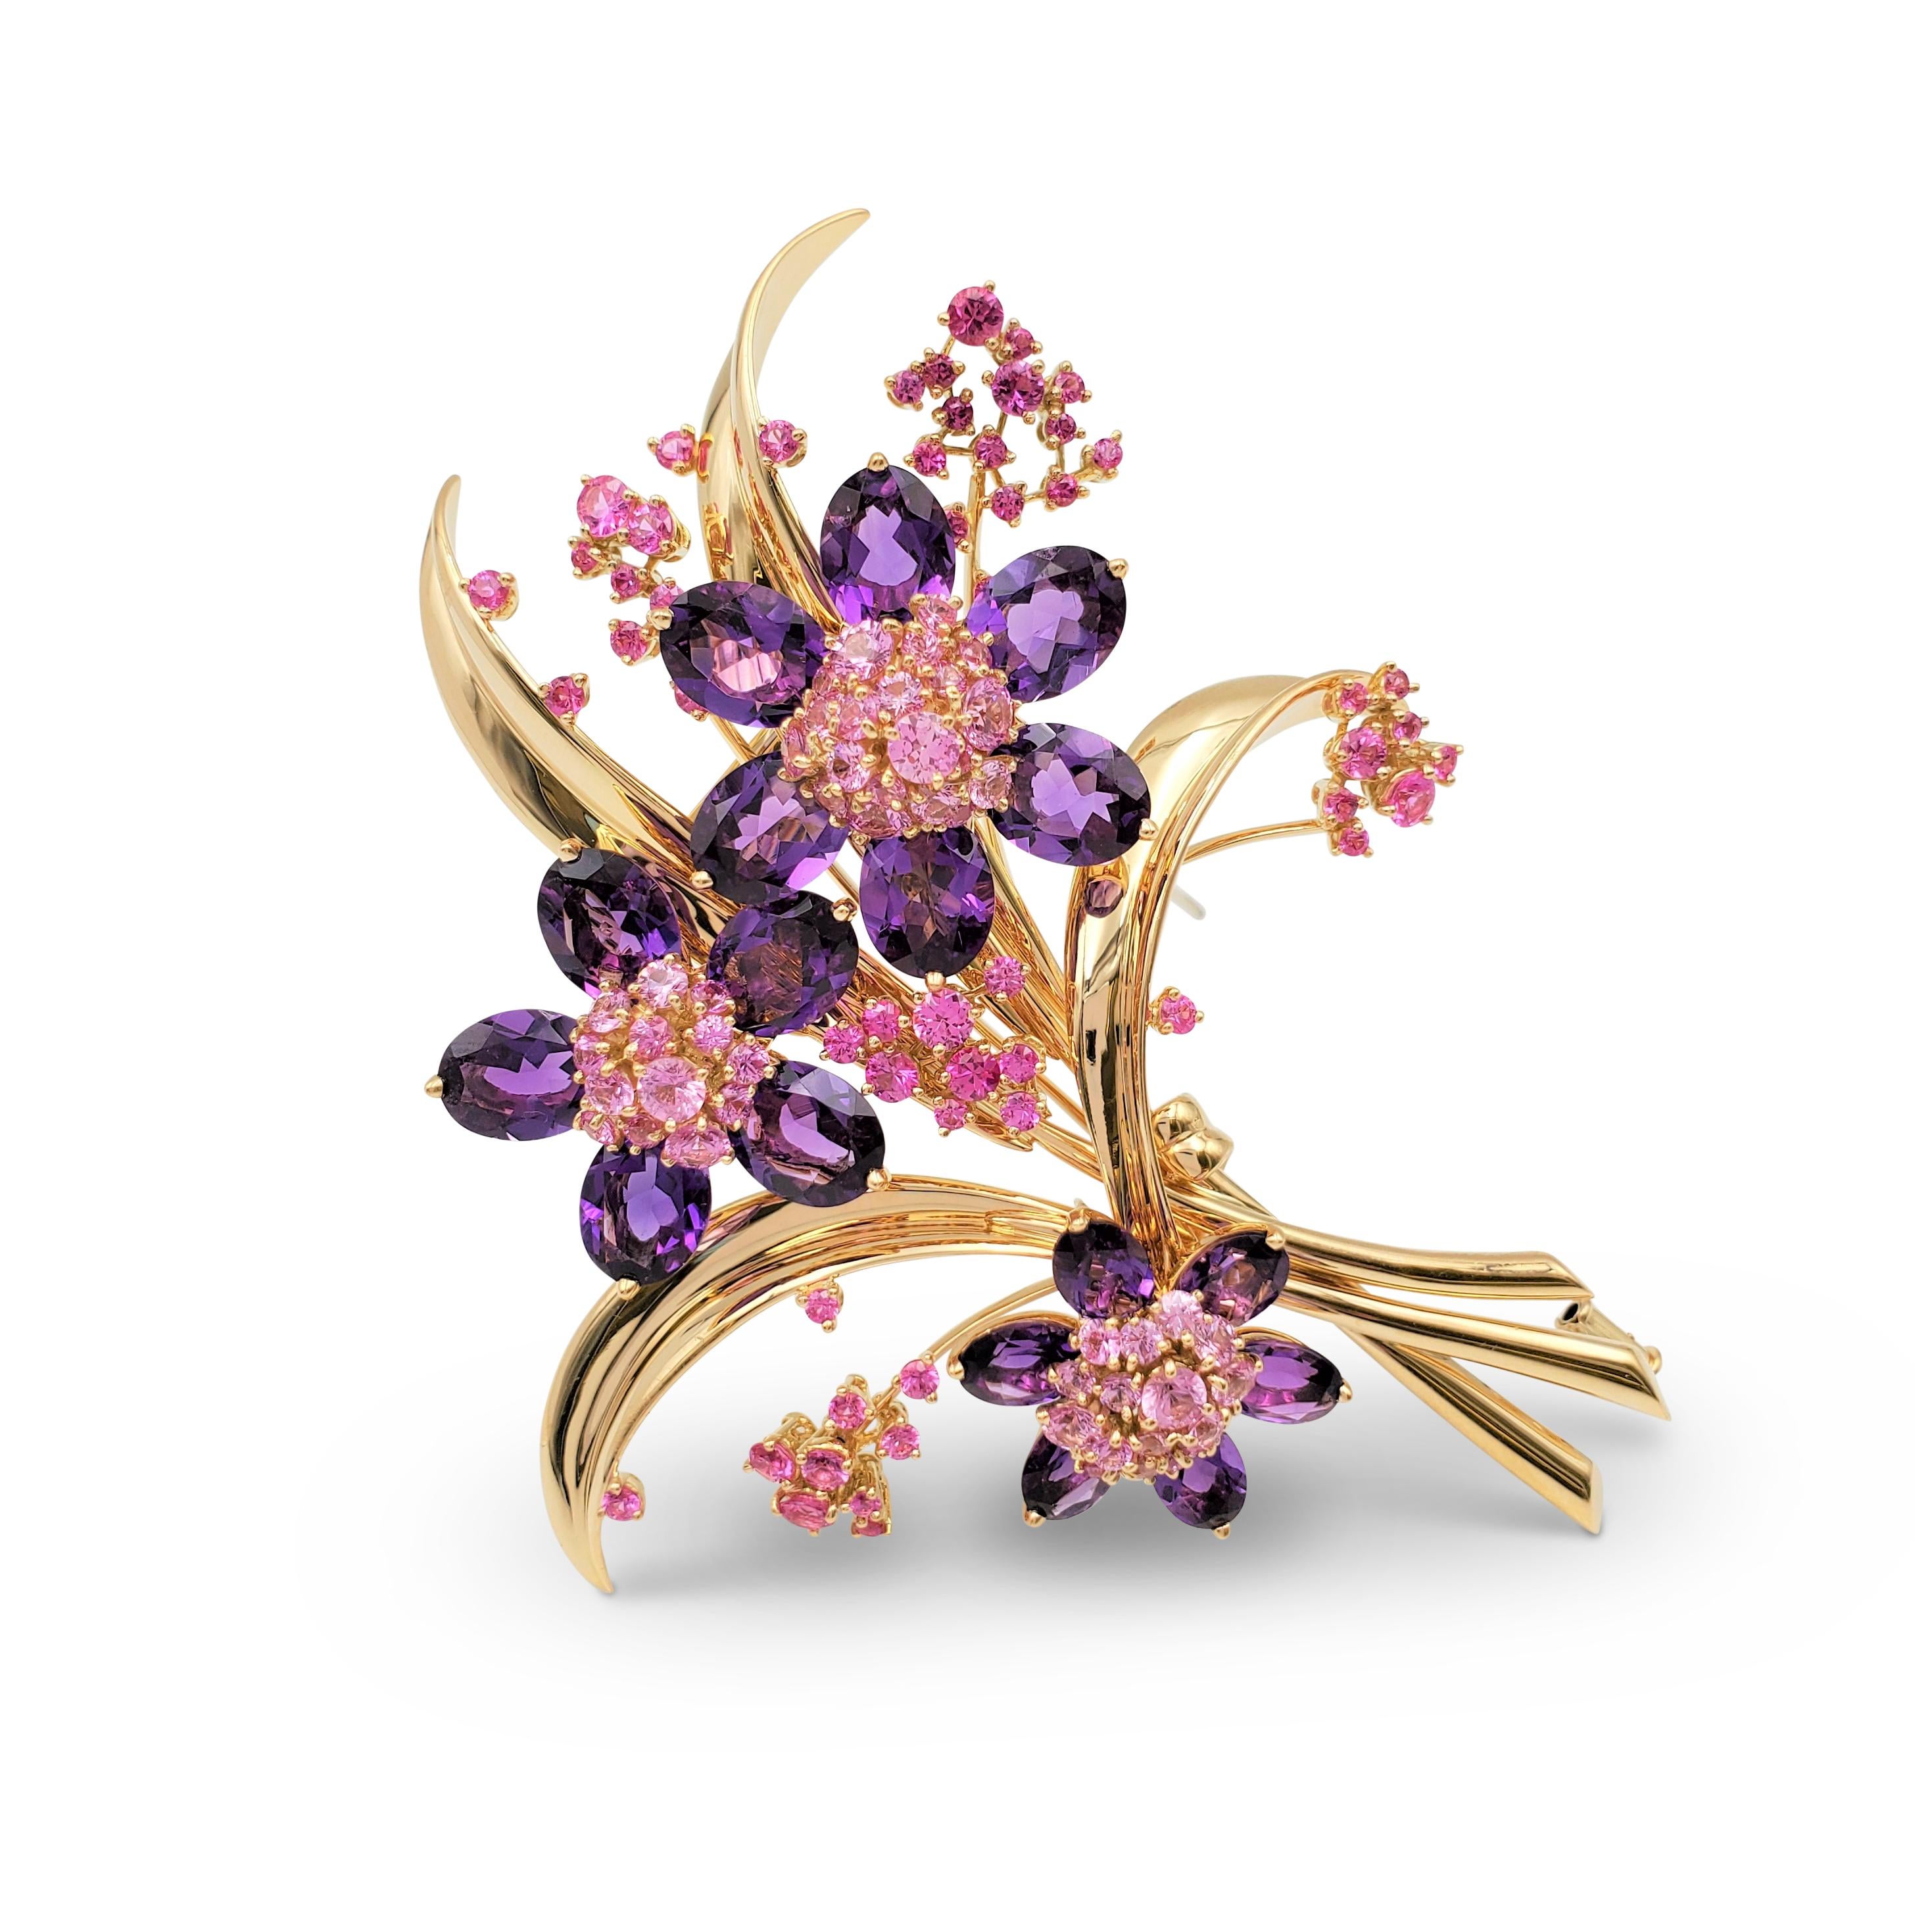 Authentic Van Cleef & Arpels 'Hawaii Bouquet' brooch. Designed as a foliate spray clip with three larger flower motifs, each flower is set with a cluster of round graduated pink sapphires, surrounded by oval-shaped amethyst petals, with smaller pink